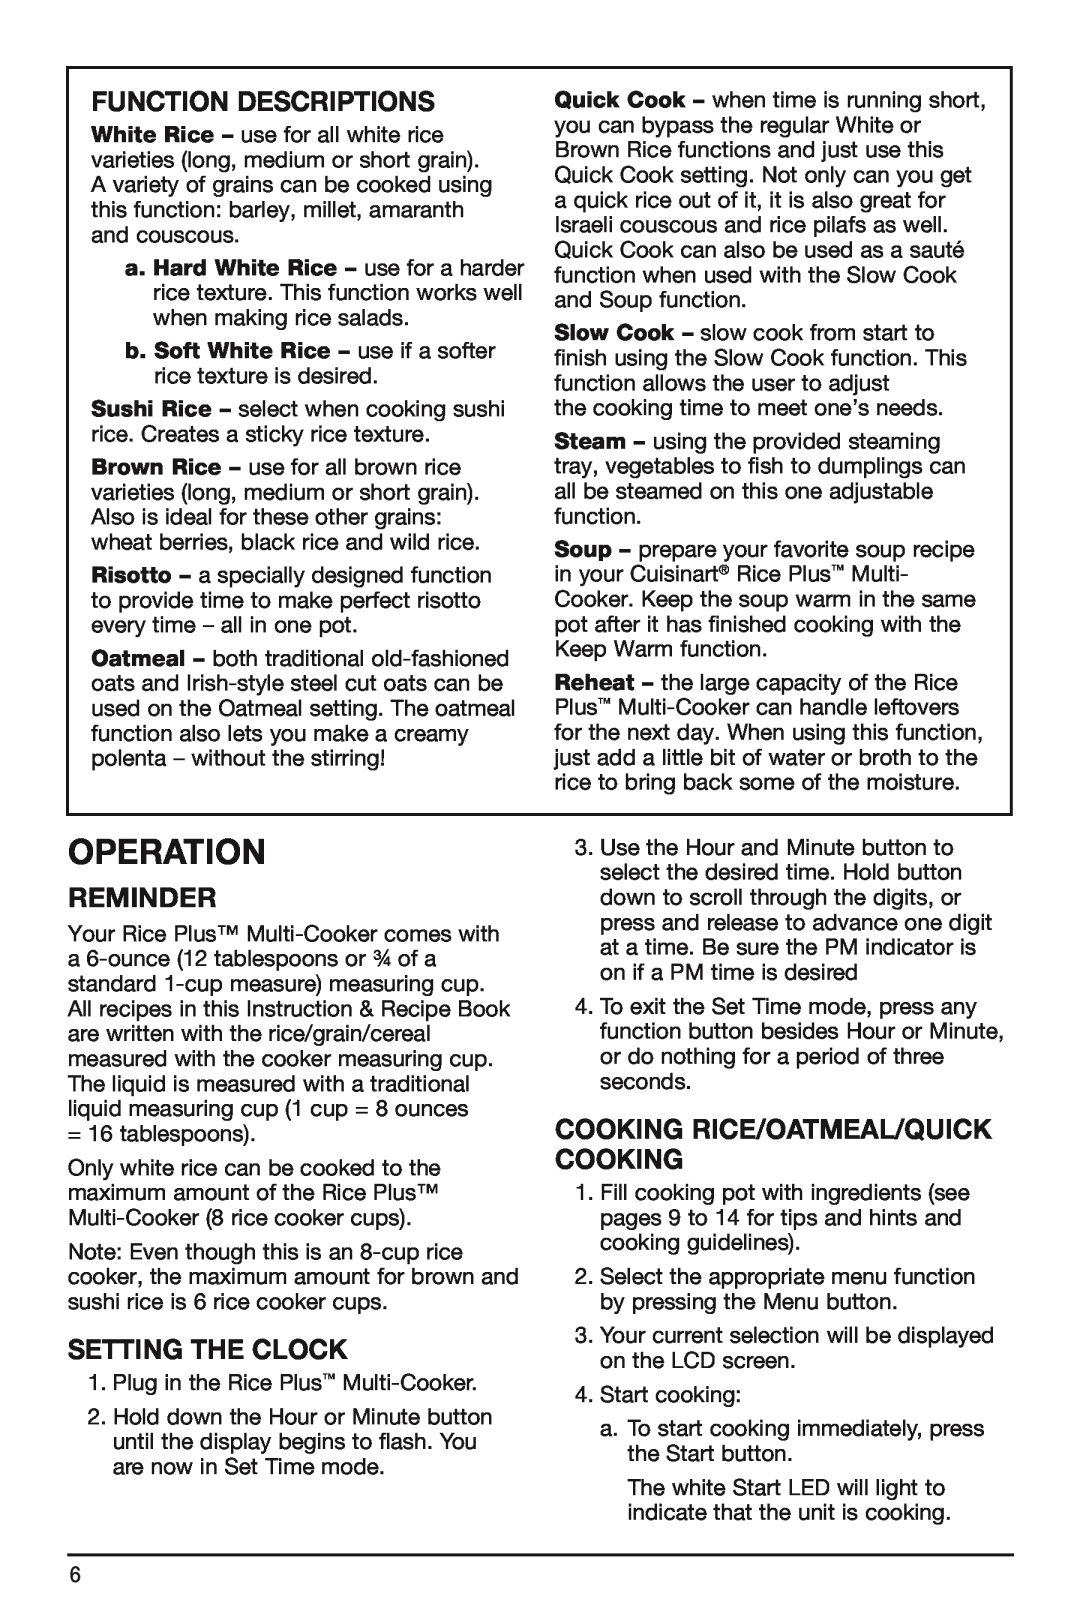 Cuisinart FRC-800 manual Operation, Function Descriptions, Reminder, Setting the Clock, Cooking Rice/Oatmeal/Quick Cooking 